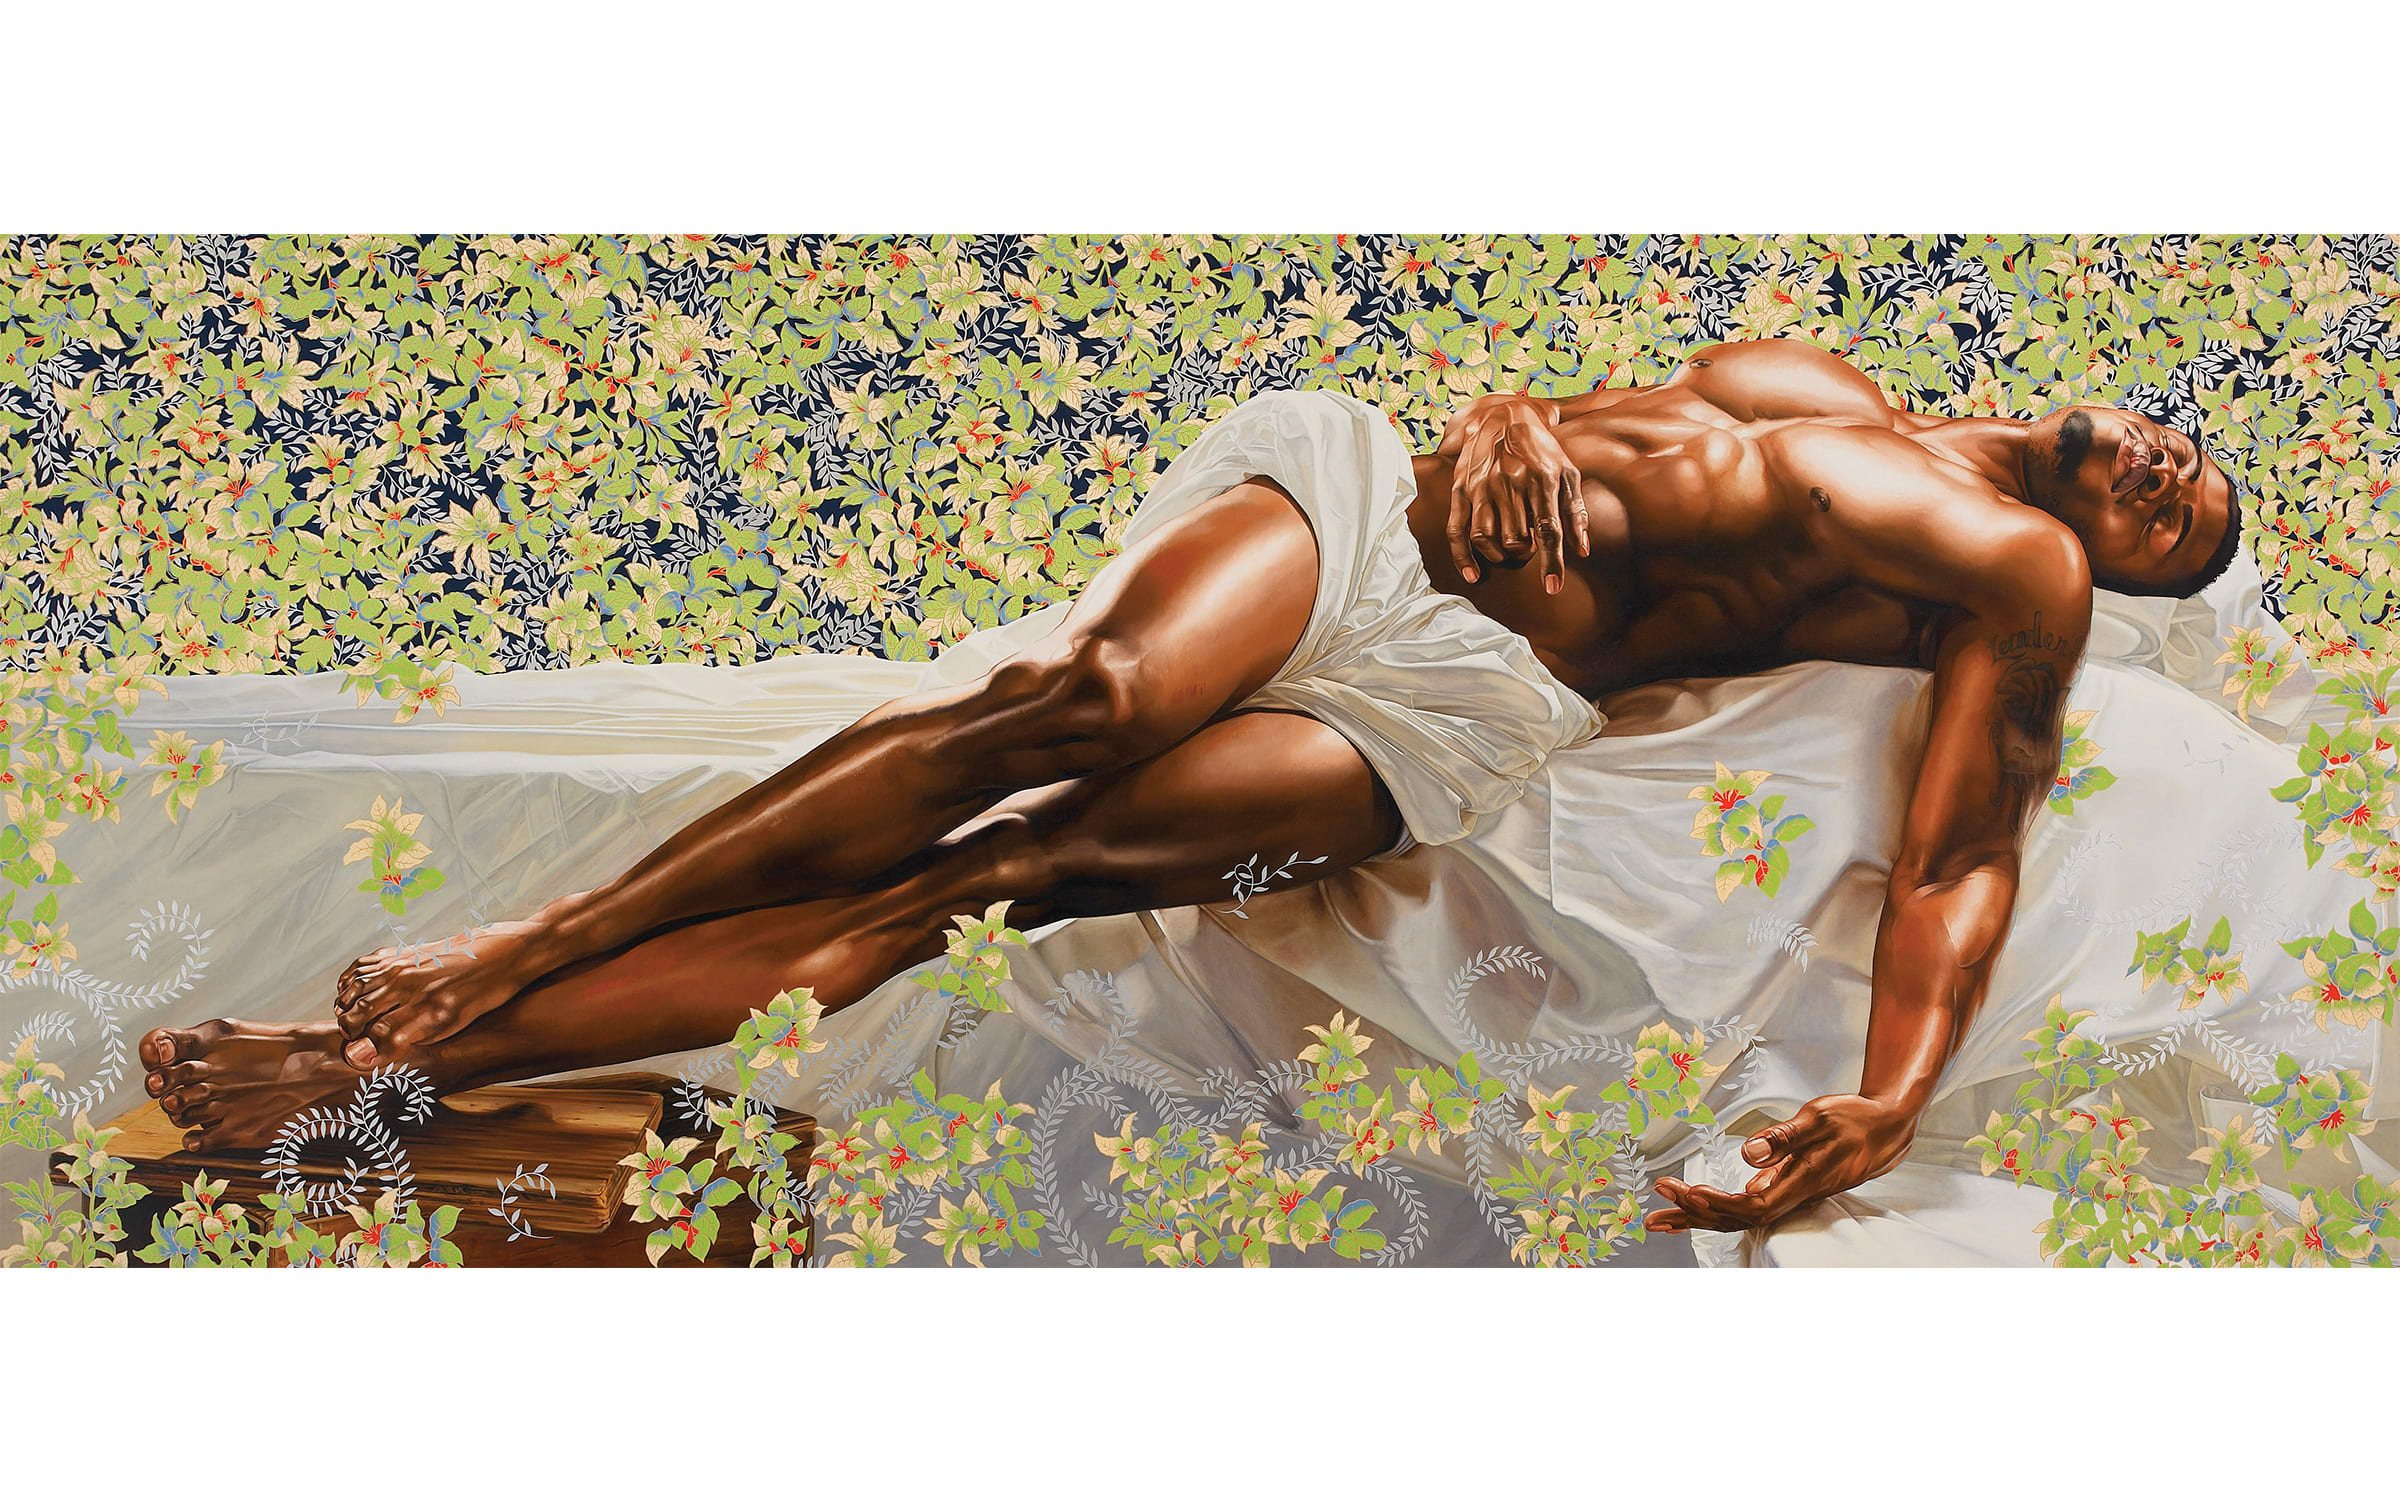 Kehinde Wiley, Sleep, 2008. Oil on canvas, 335.3 x 762cm, acquired in 2009. © Kehinde Wiley.